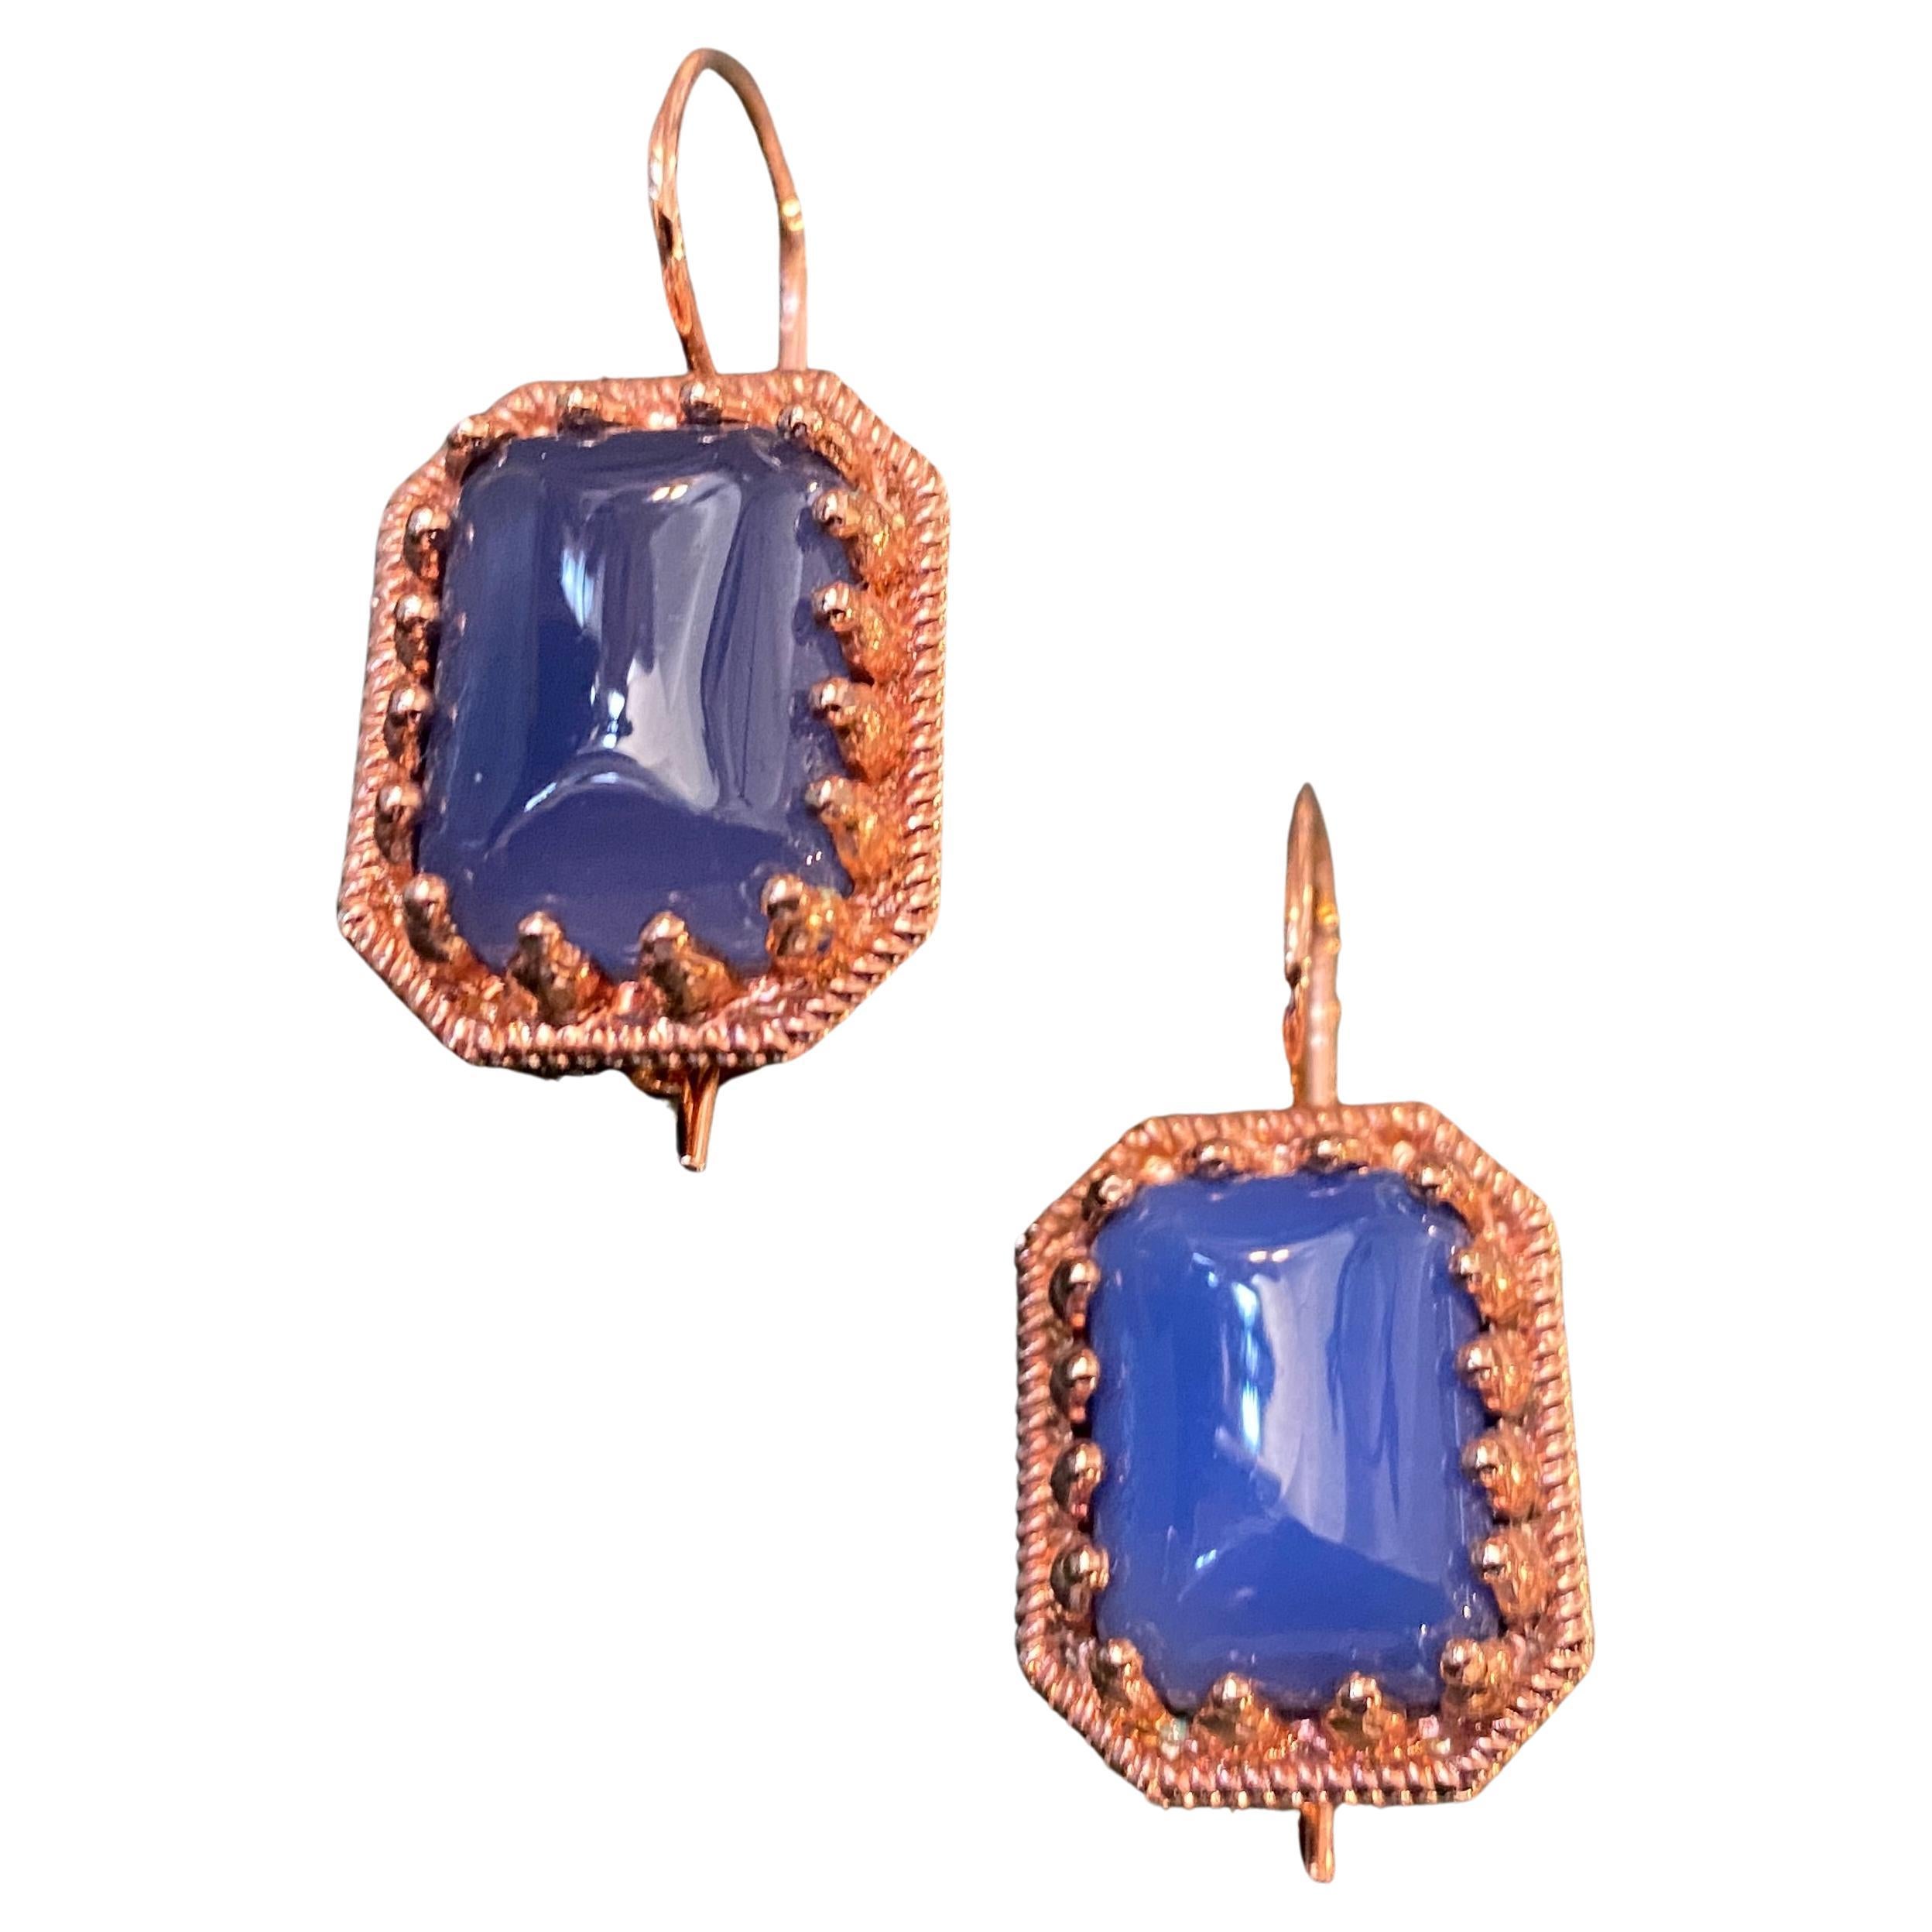 A bronze parure composed by a ring and a pair of earrings designed and manufactured in Italy by Anomis. The rectangular cabochon blue agate are in perfect condition.